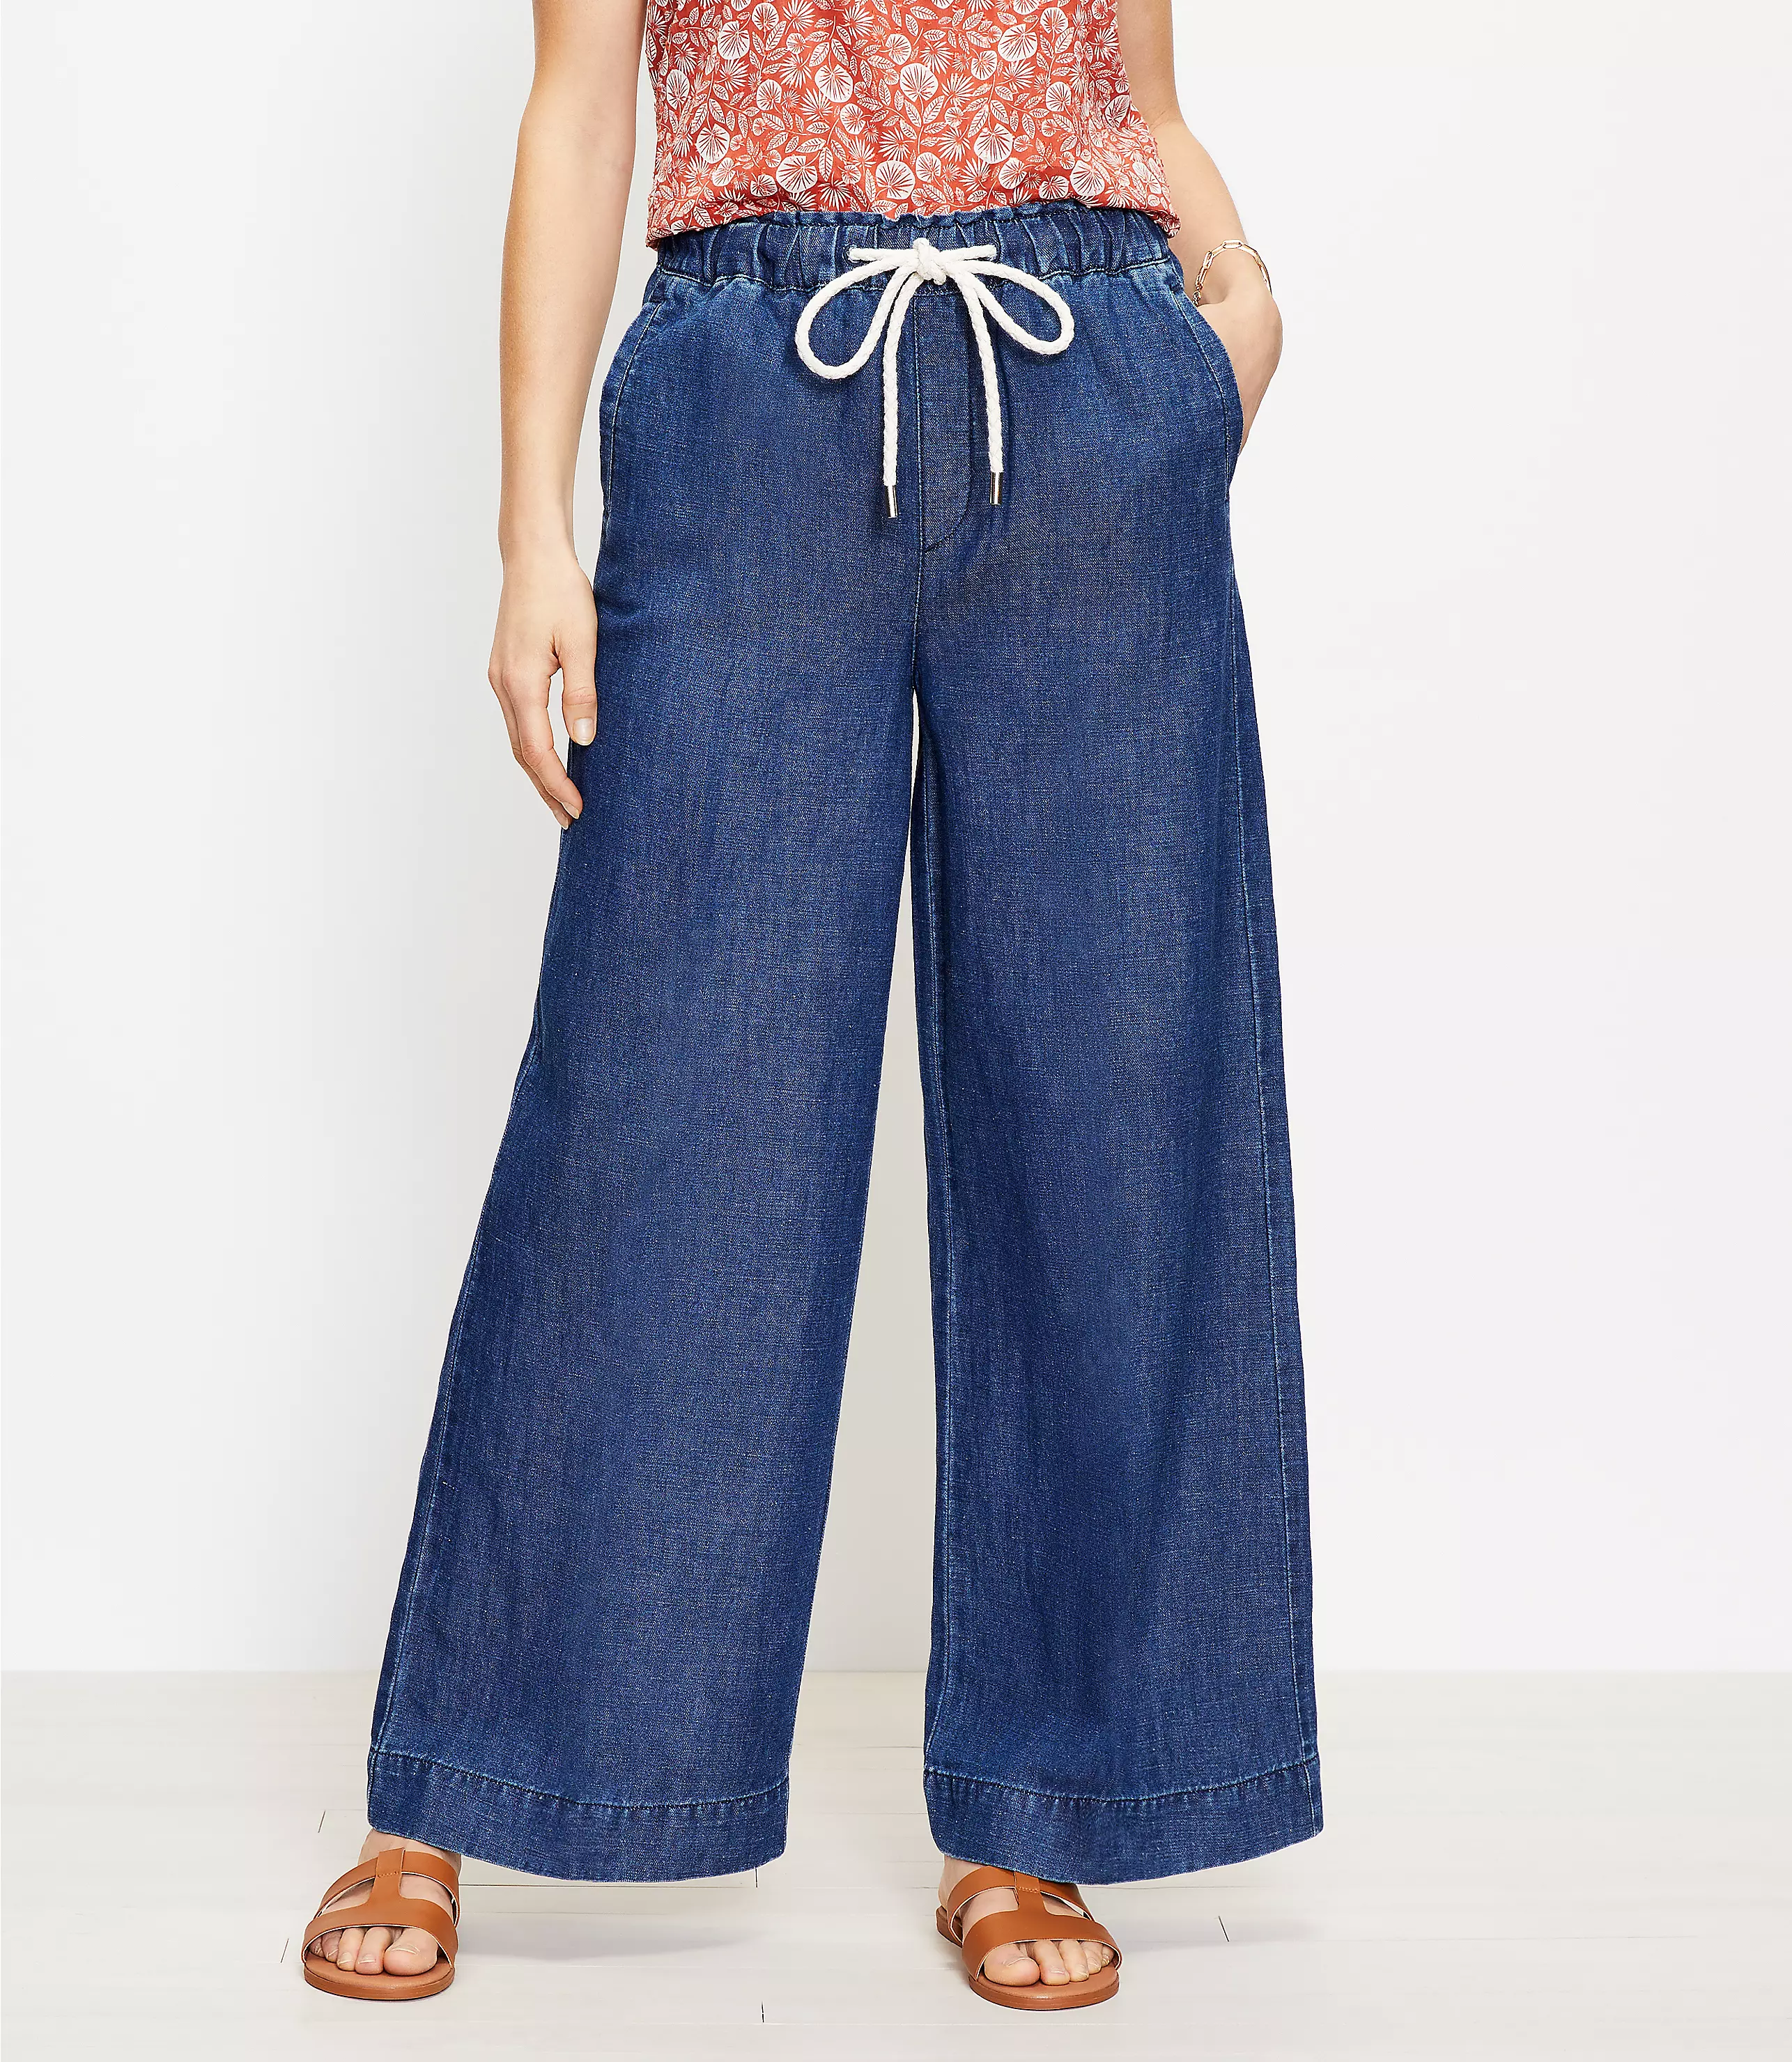 High Rise Cotton Linen Pull On Wide Leg Jeans in Indigo Seas